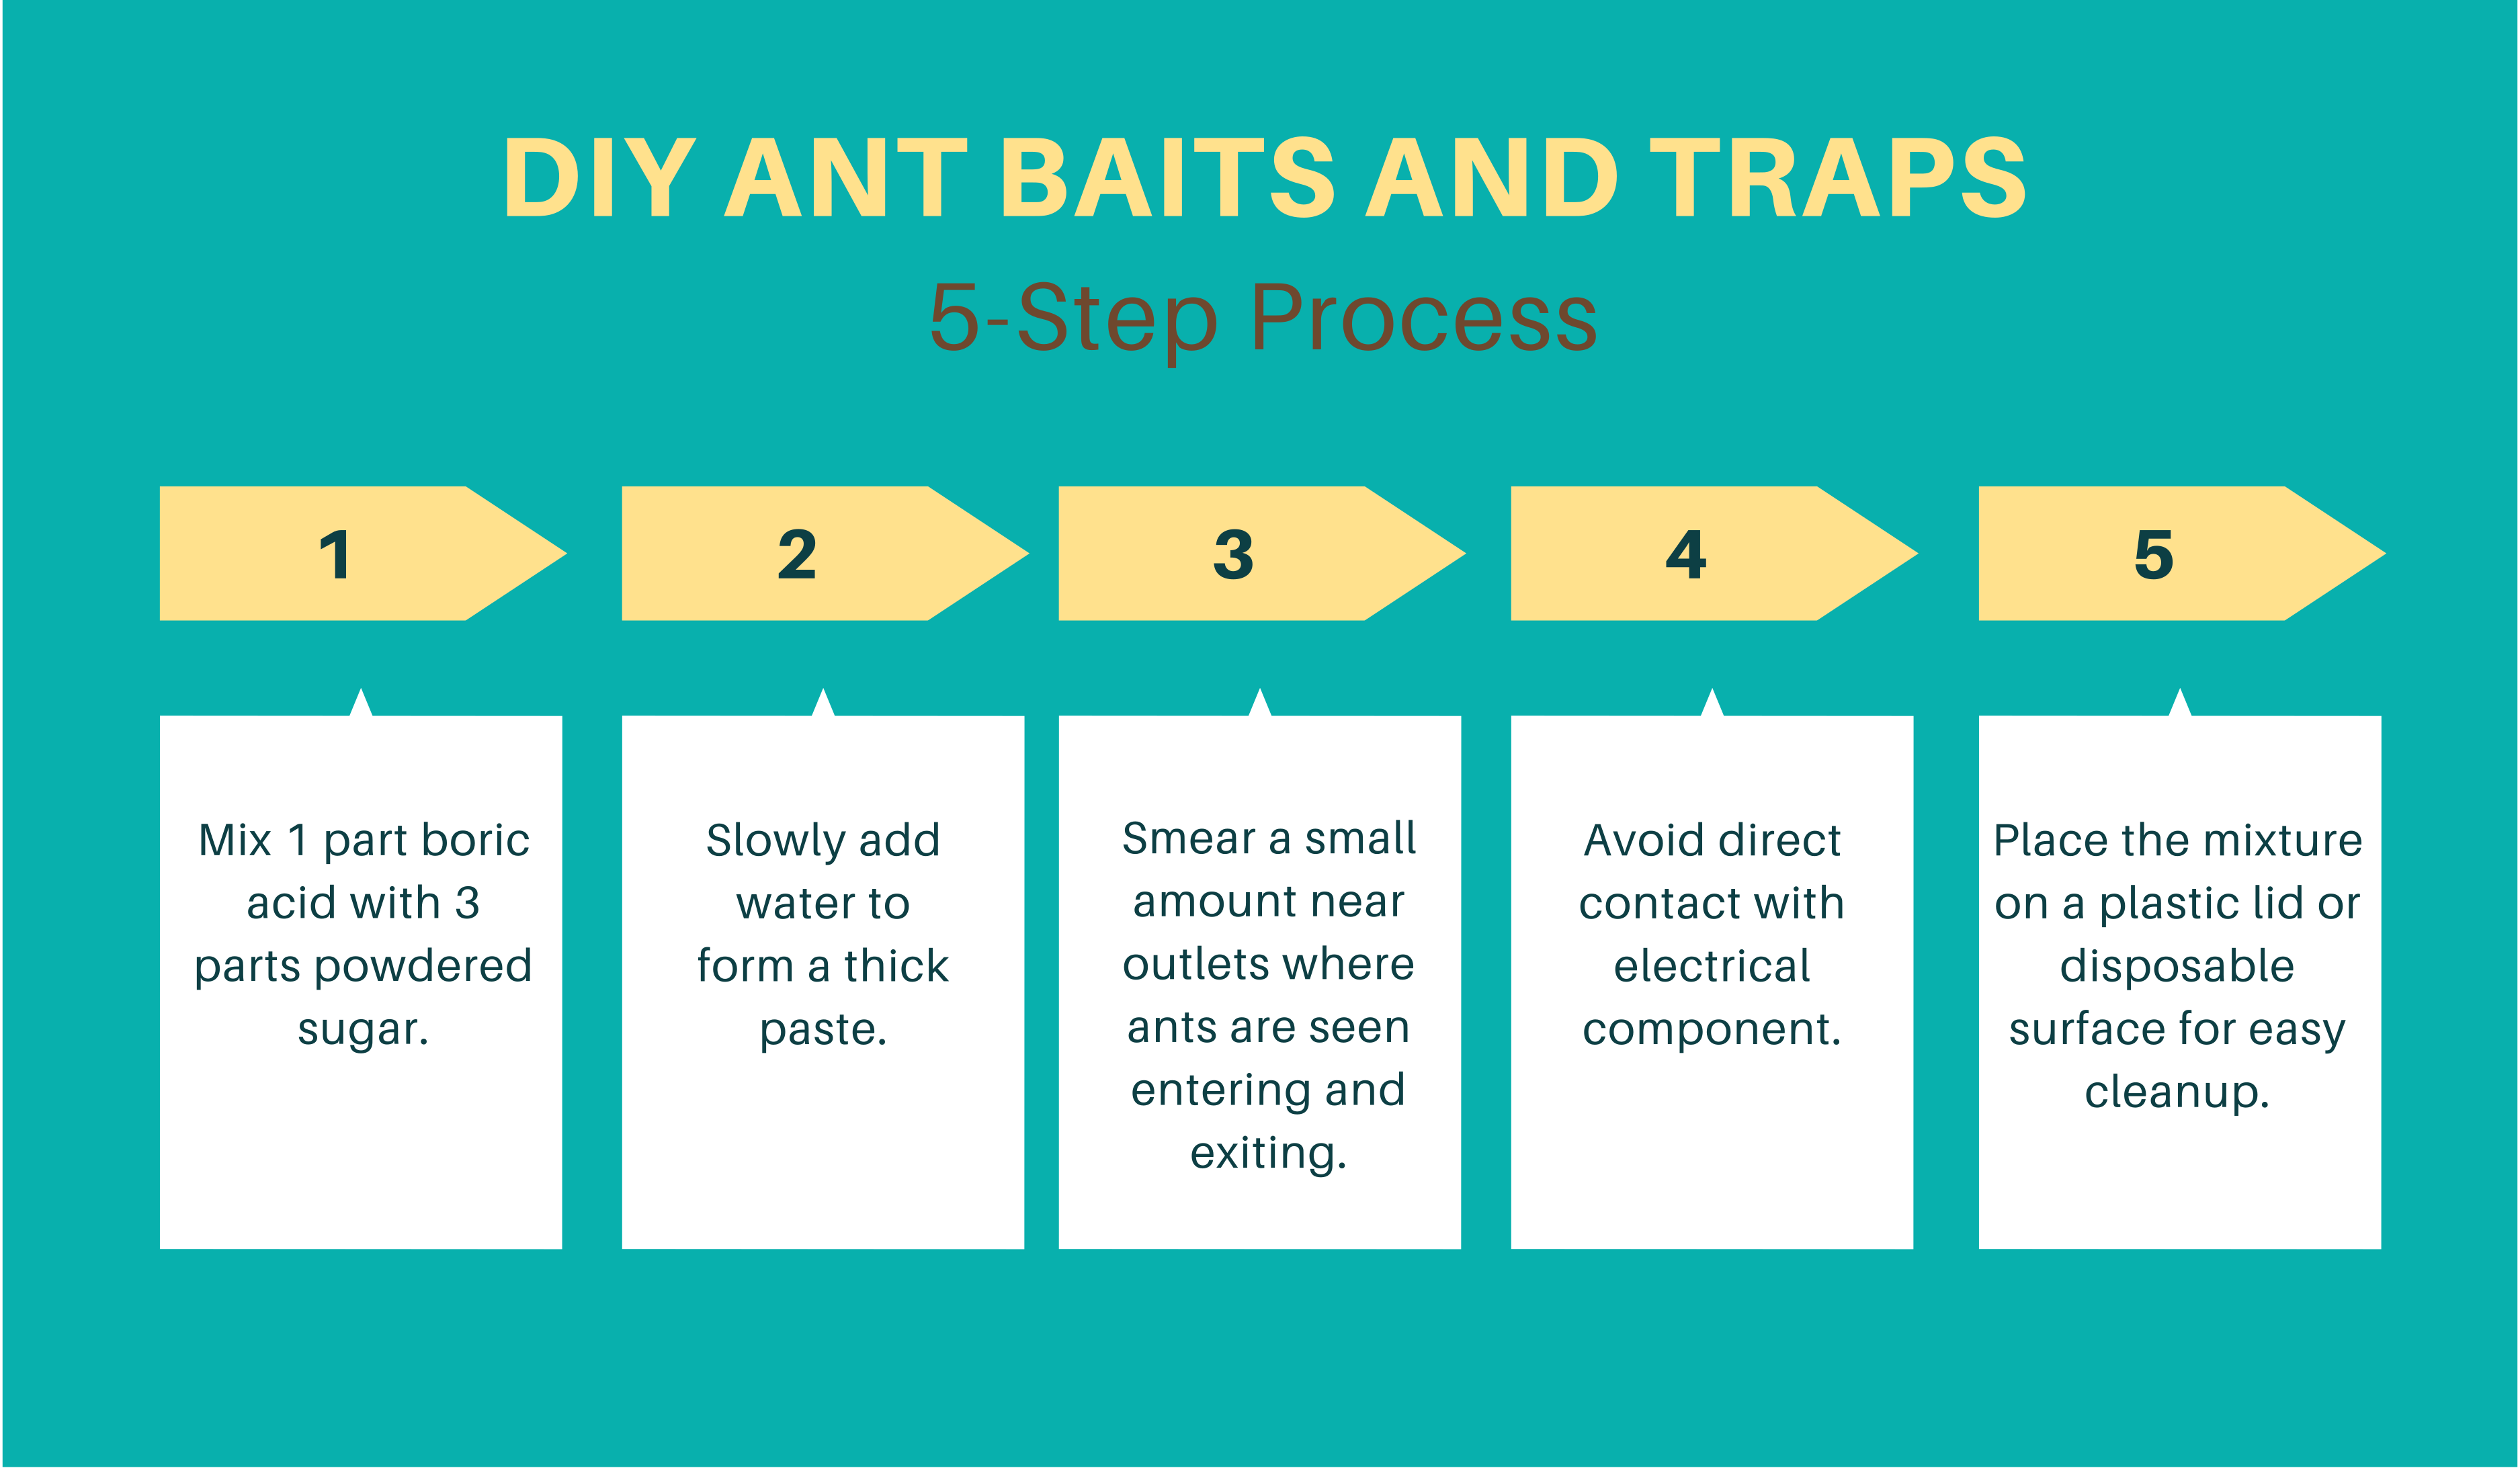 DIY ant baits and traps table